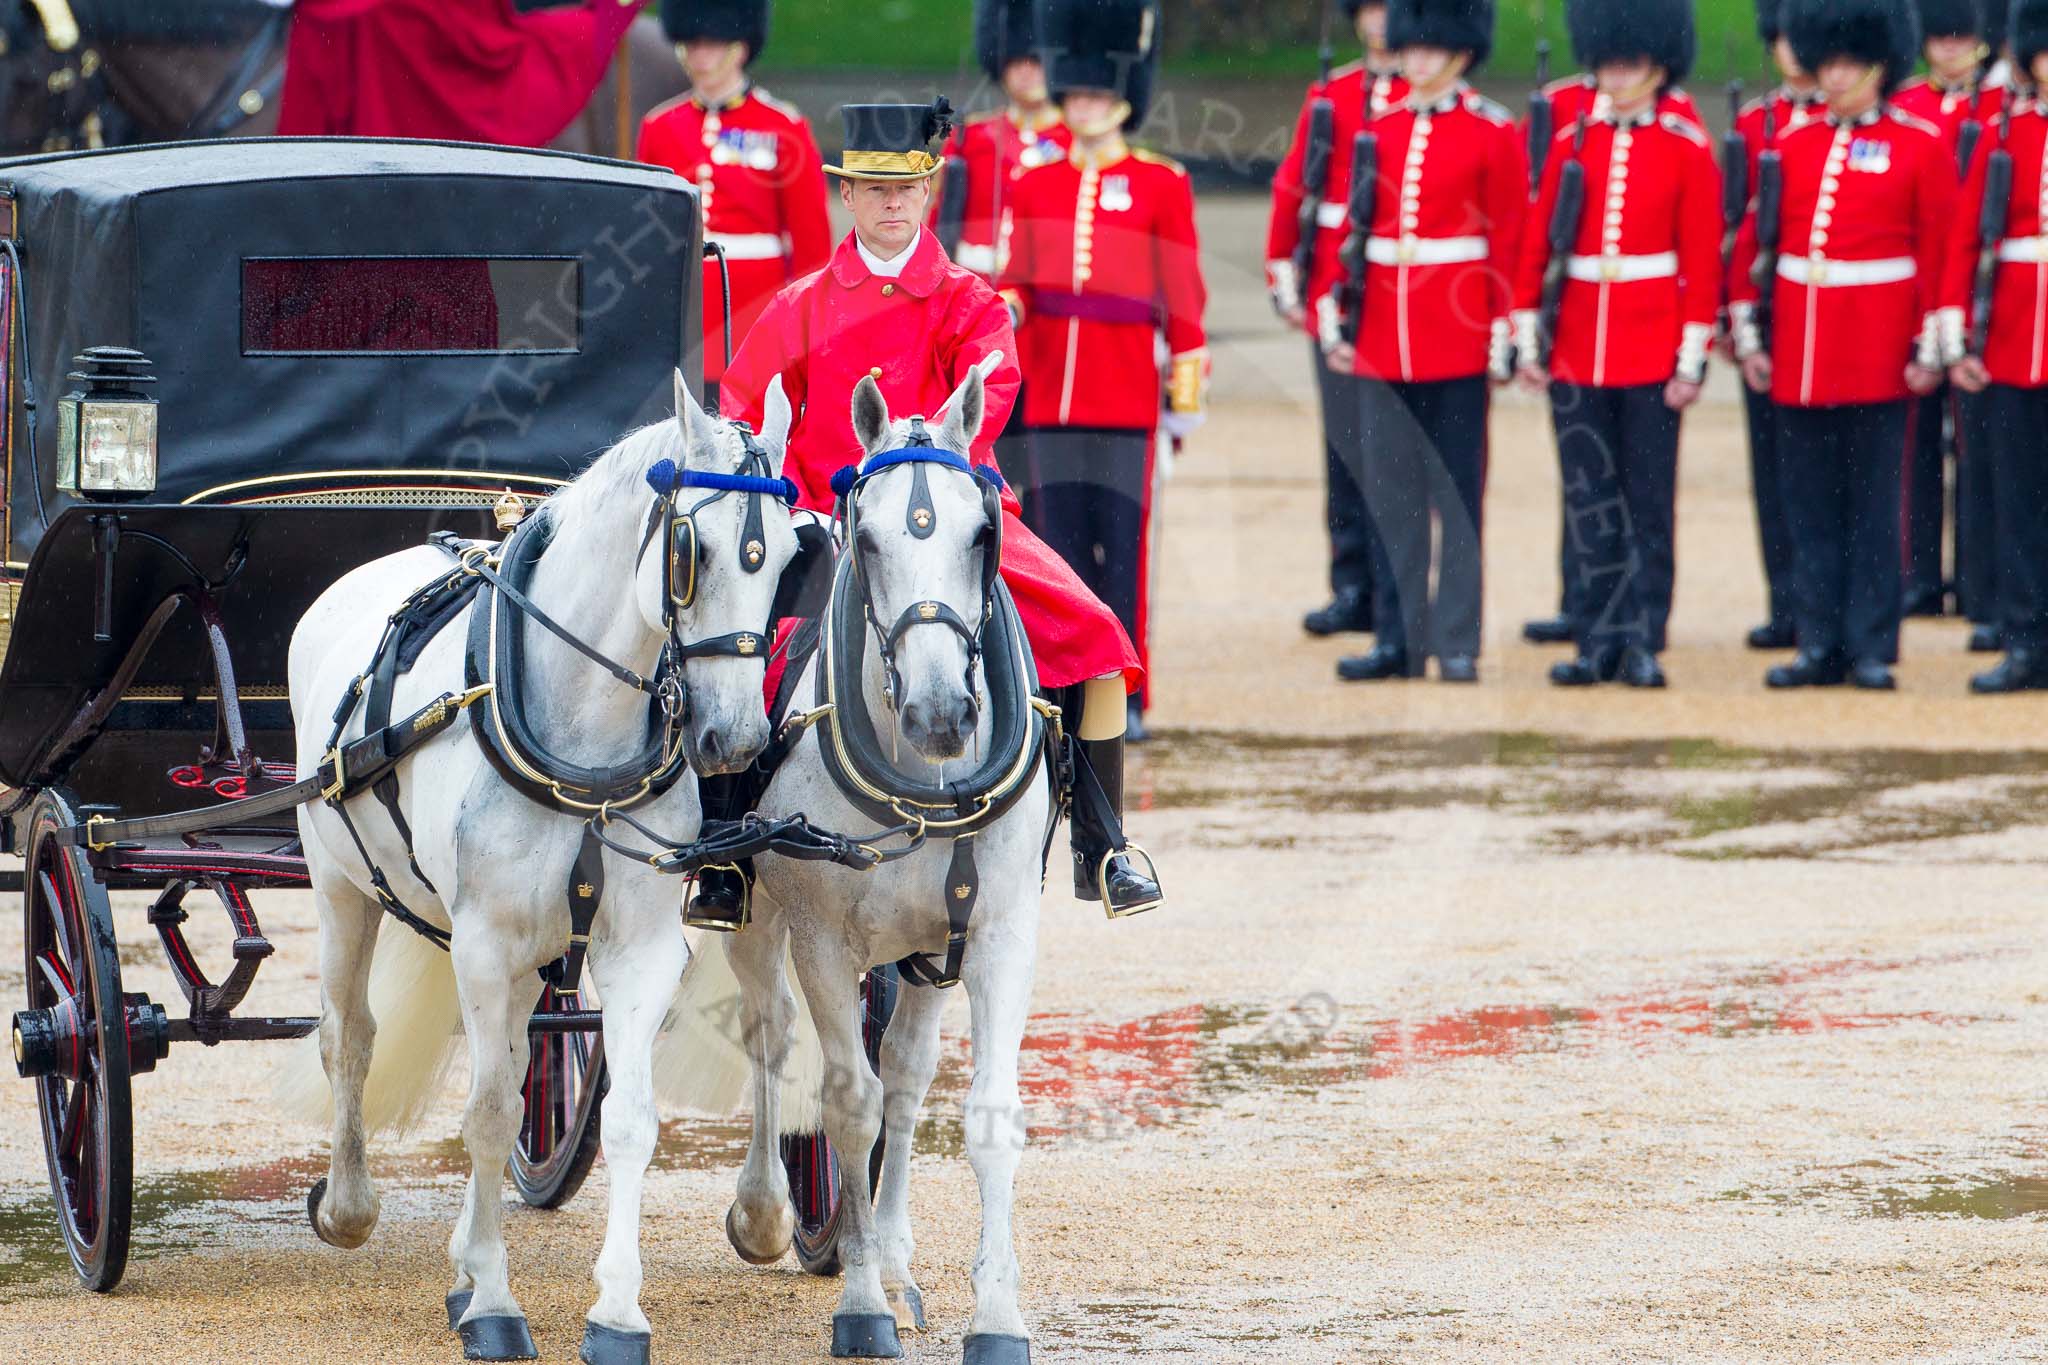 The Colonel's Review 2014.
Horse Guards Parade, Westminster,
London,

United Kingdom,
on 07 June 2014 at 11:05, image #297